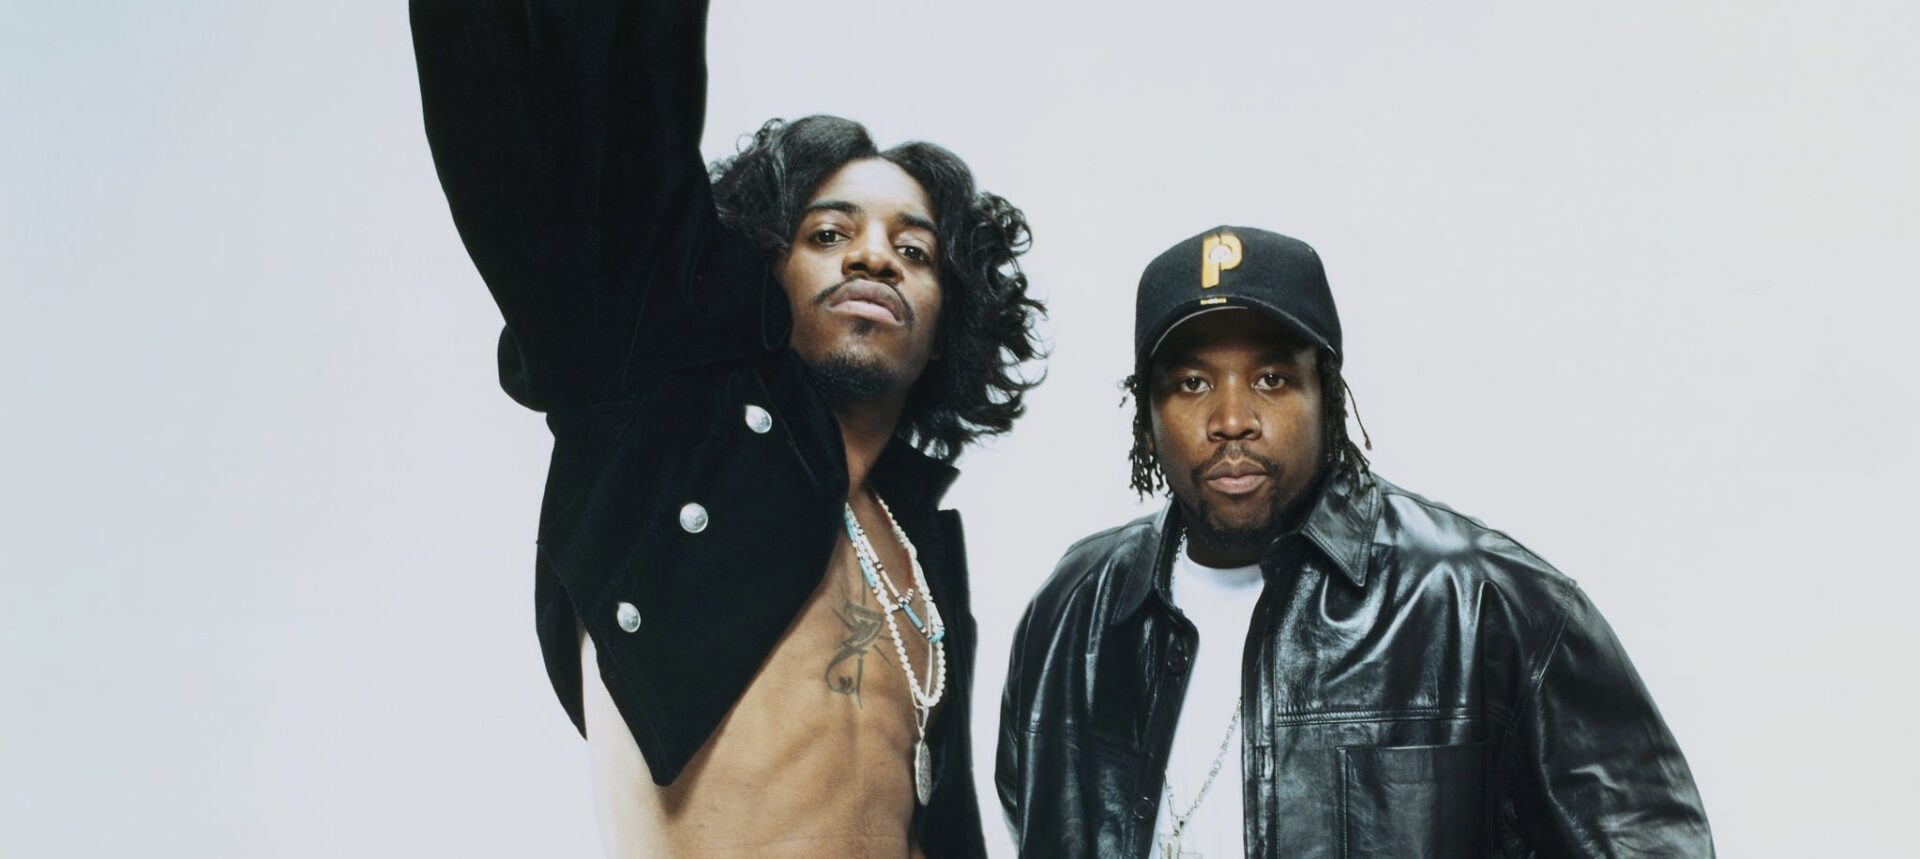 Billboard Ranks Outkast Greatest Rap Group Of All Time